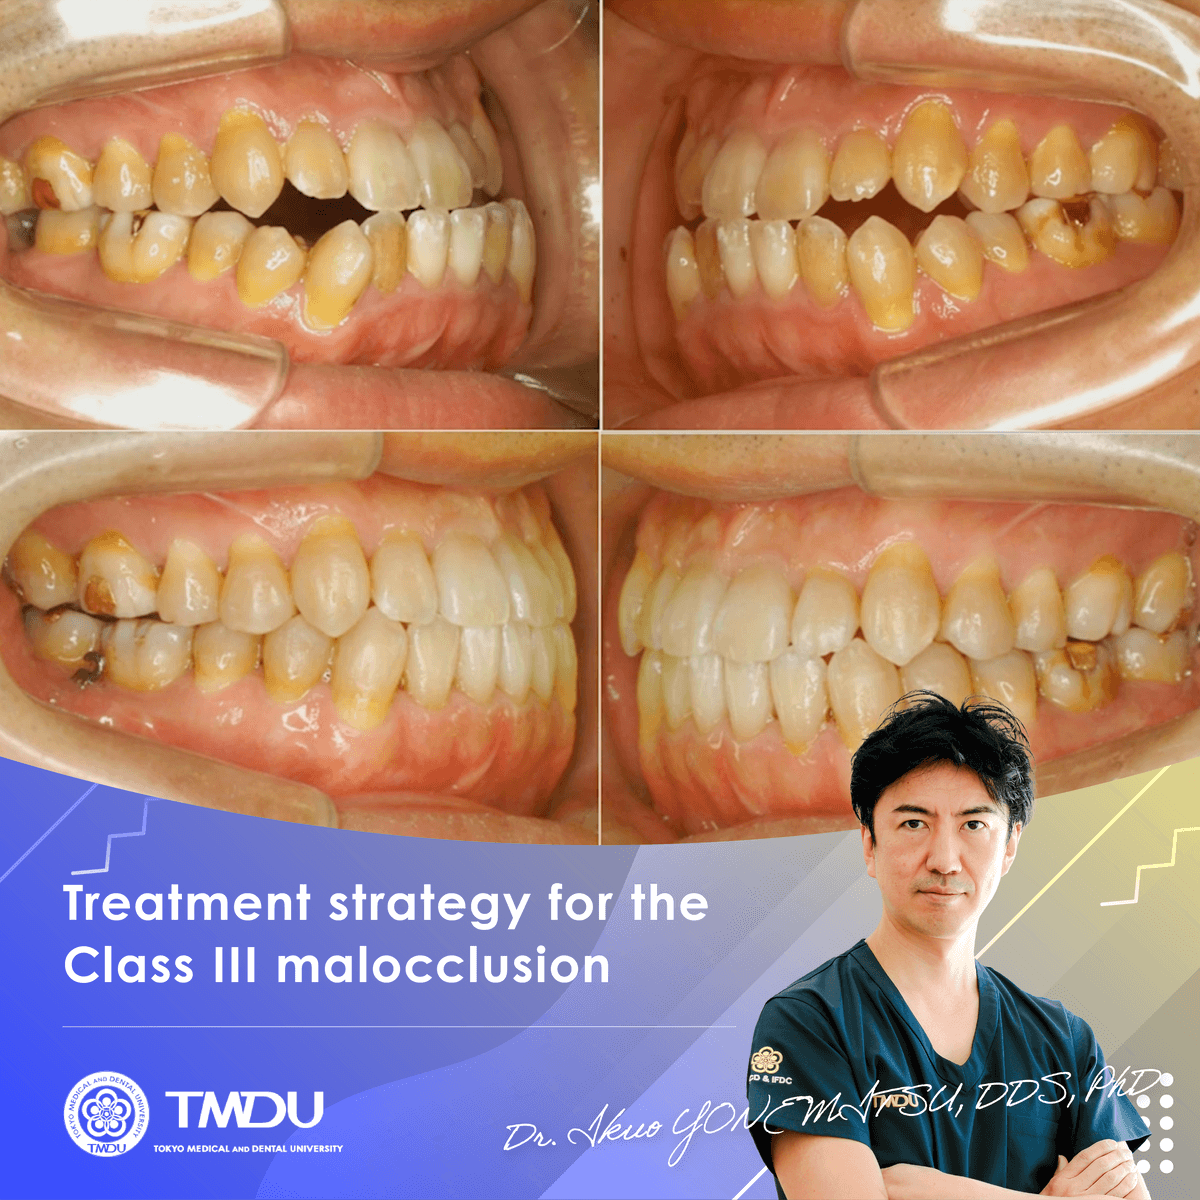 Treatment strategy for the Class III malocclusion